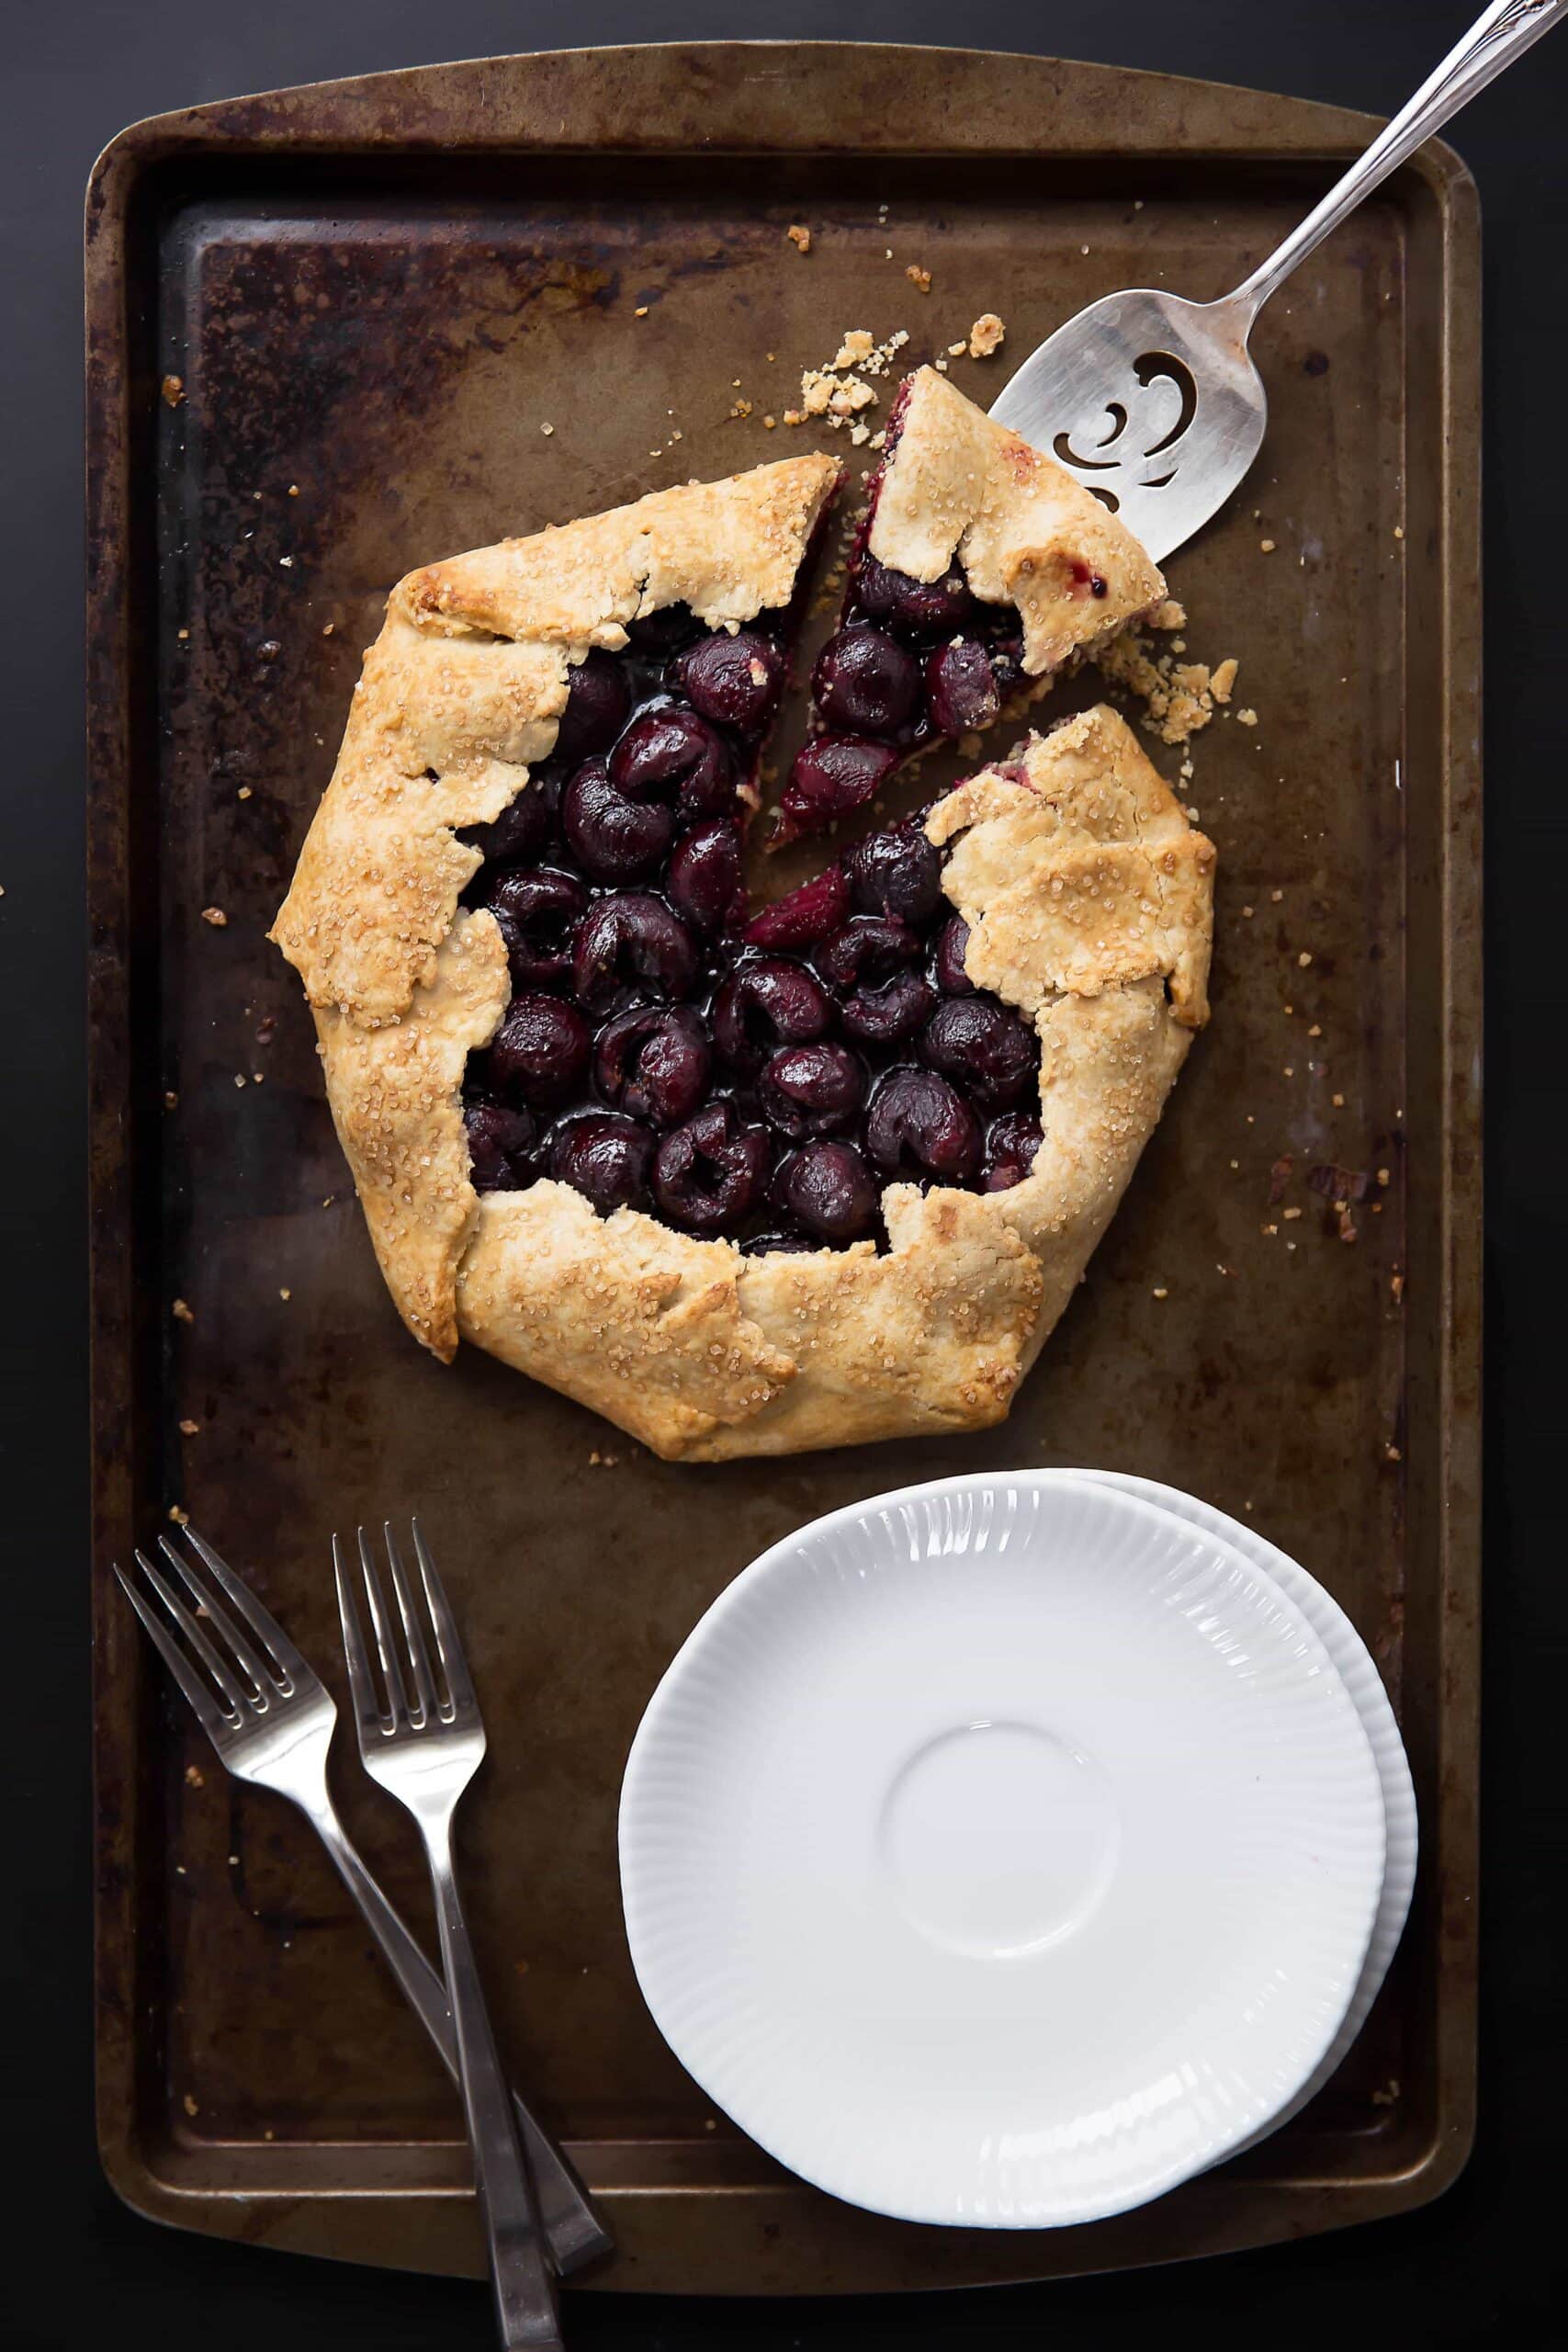 Roasted cherries and balsamic come together in this marvelous Balsamic Cherry Galette!